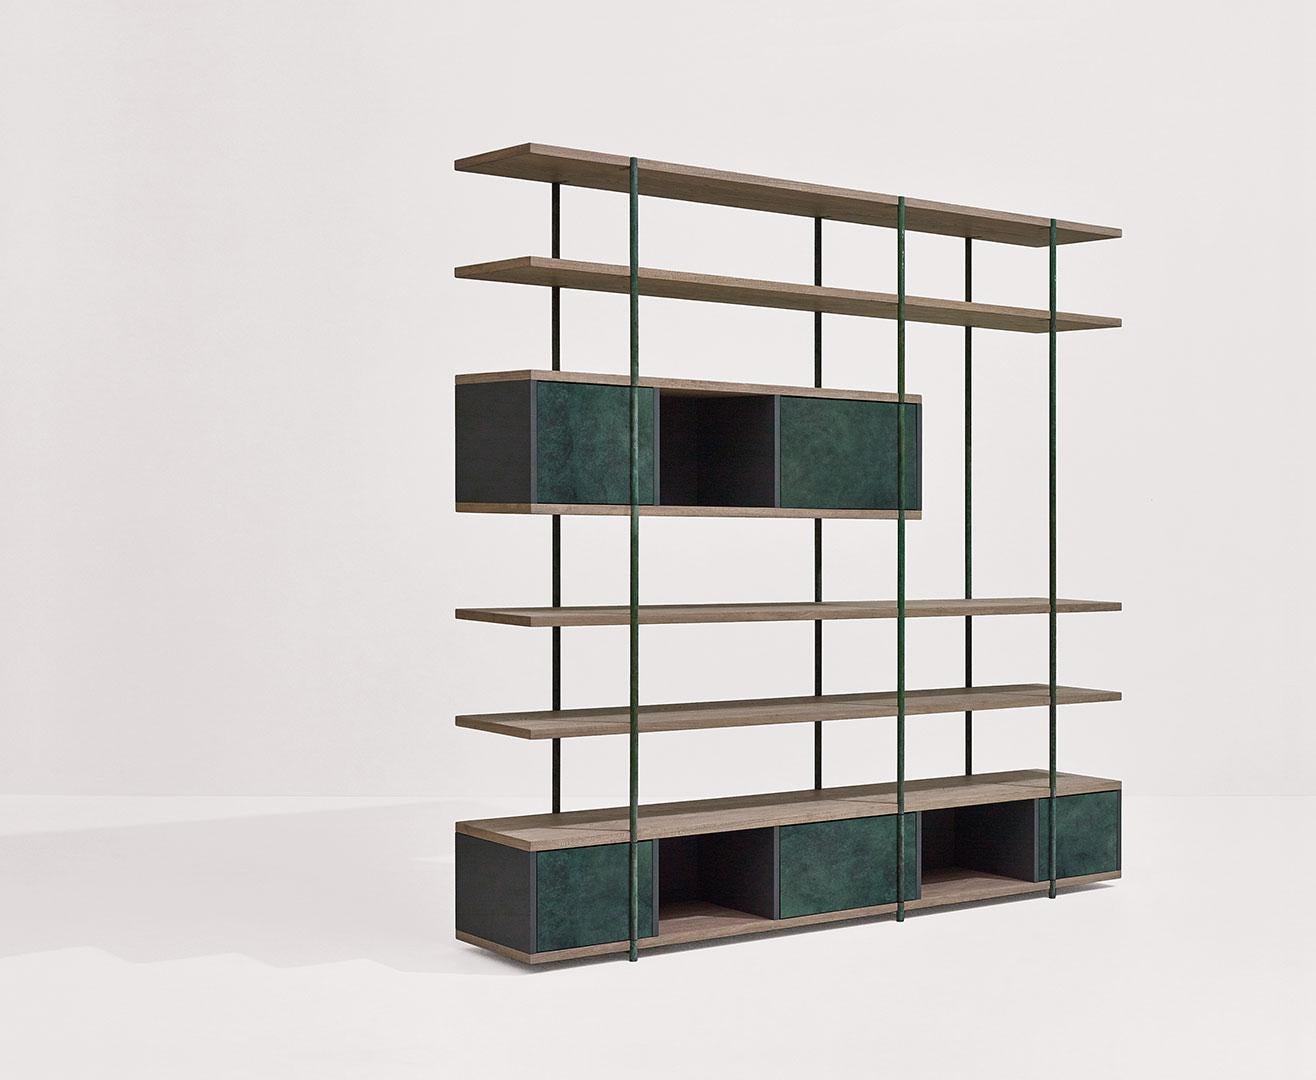 Pivot bookshelf by SEM
Dimensions: W216 x D38 x H203 cm
Material: metallic tubolar structure, pivoting doors in surface in antique brass or patinas, Shelves in fossil elm or Canaletto walnut, Side and back panels in matt
painted MDF. 
Available